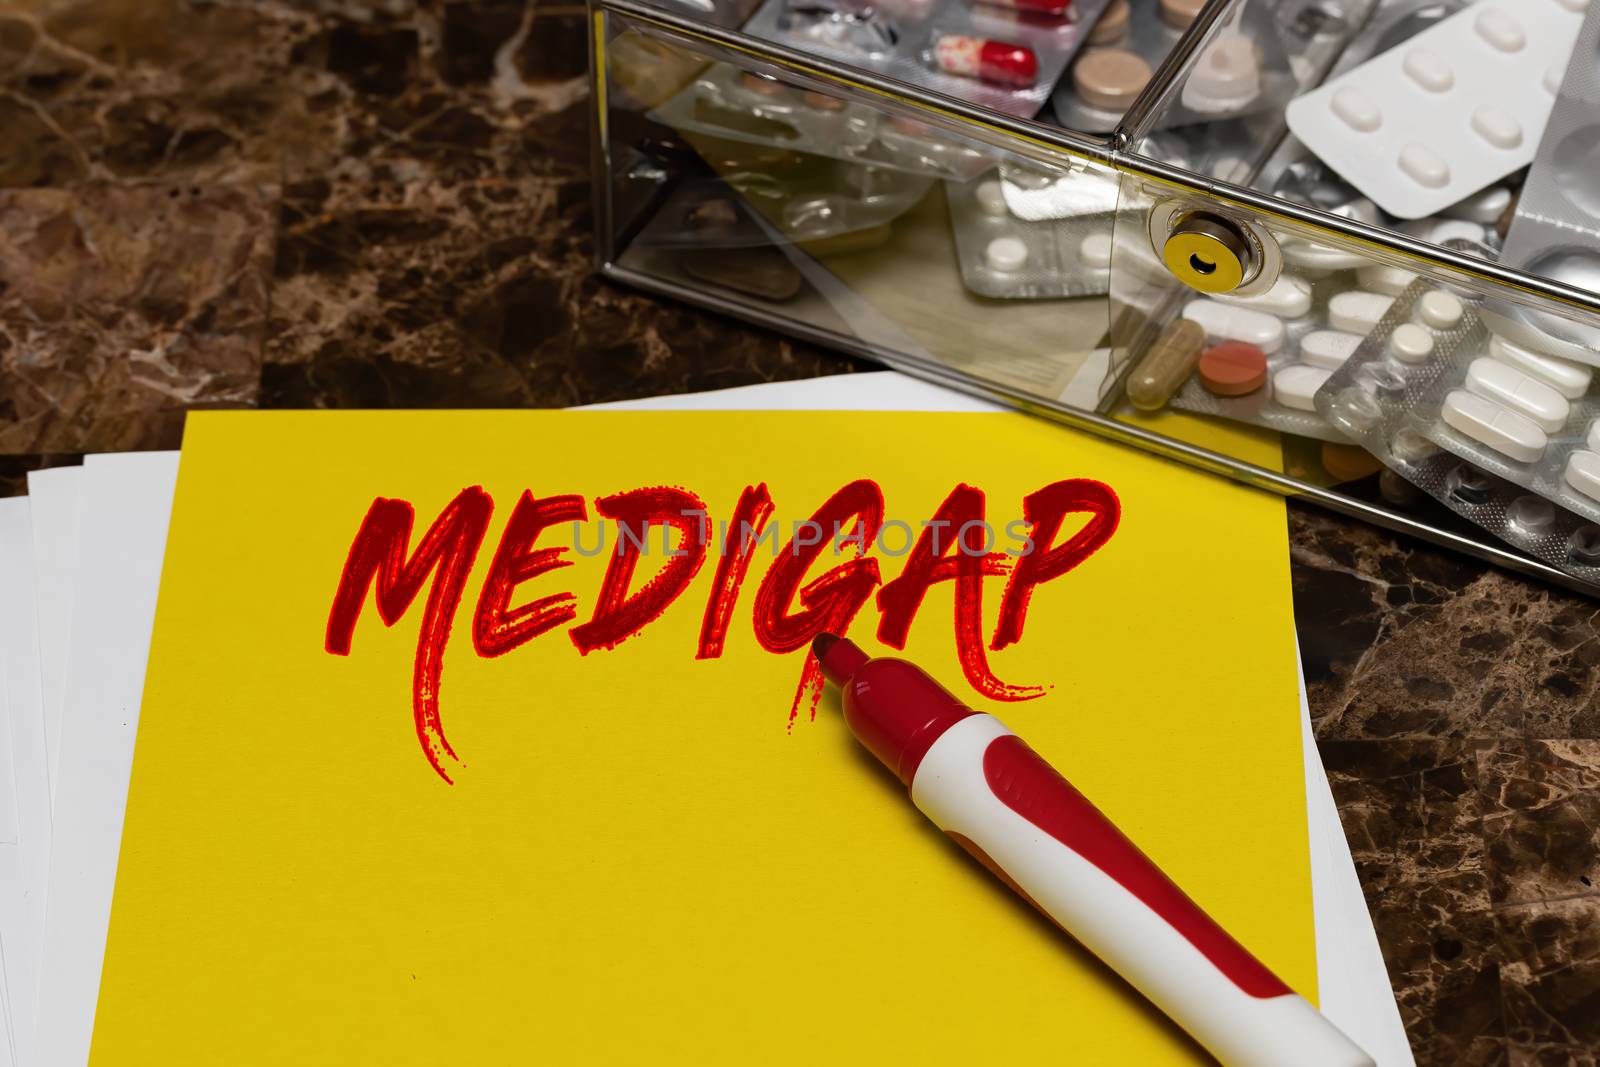 Medigap is written in red letters on a yellow sheet lying on the table next to a box of pills. by bonilook